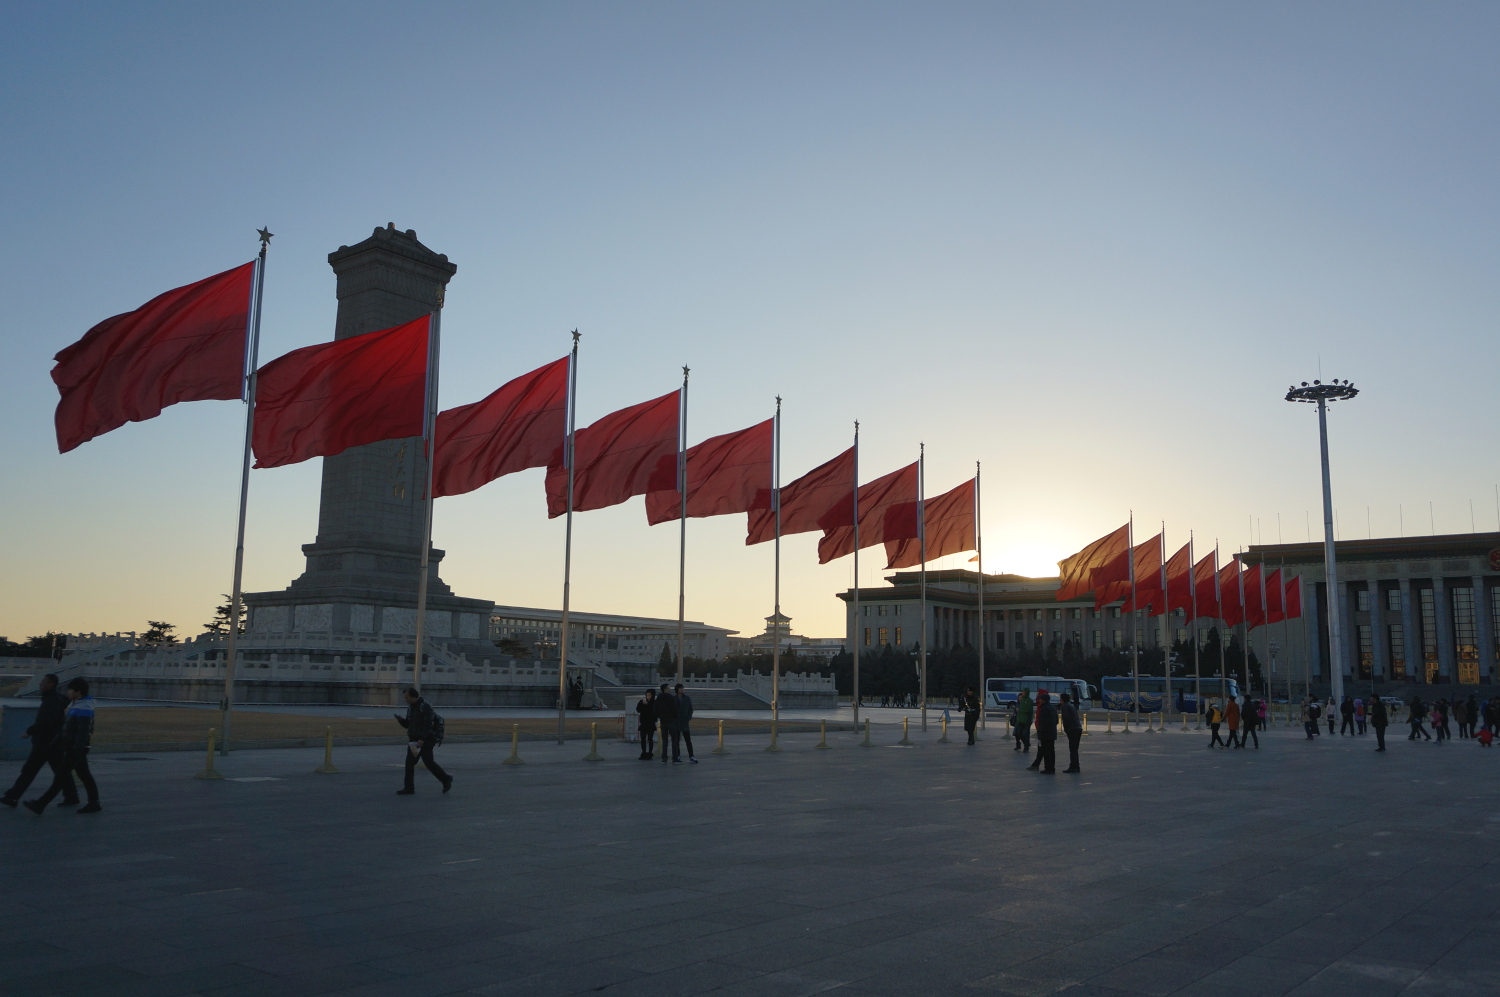 Sun setting over Tian'anmen Square. Image by Anita Isalska / Lonely Planet